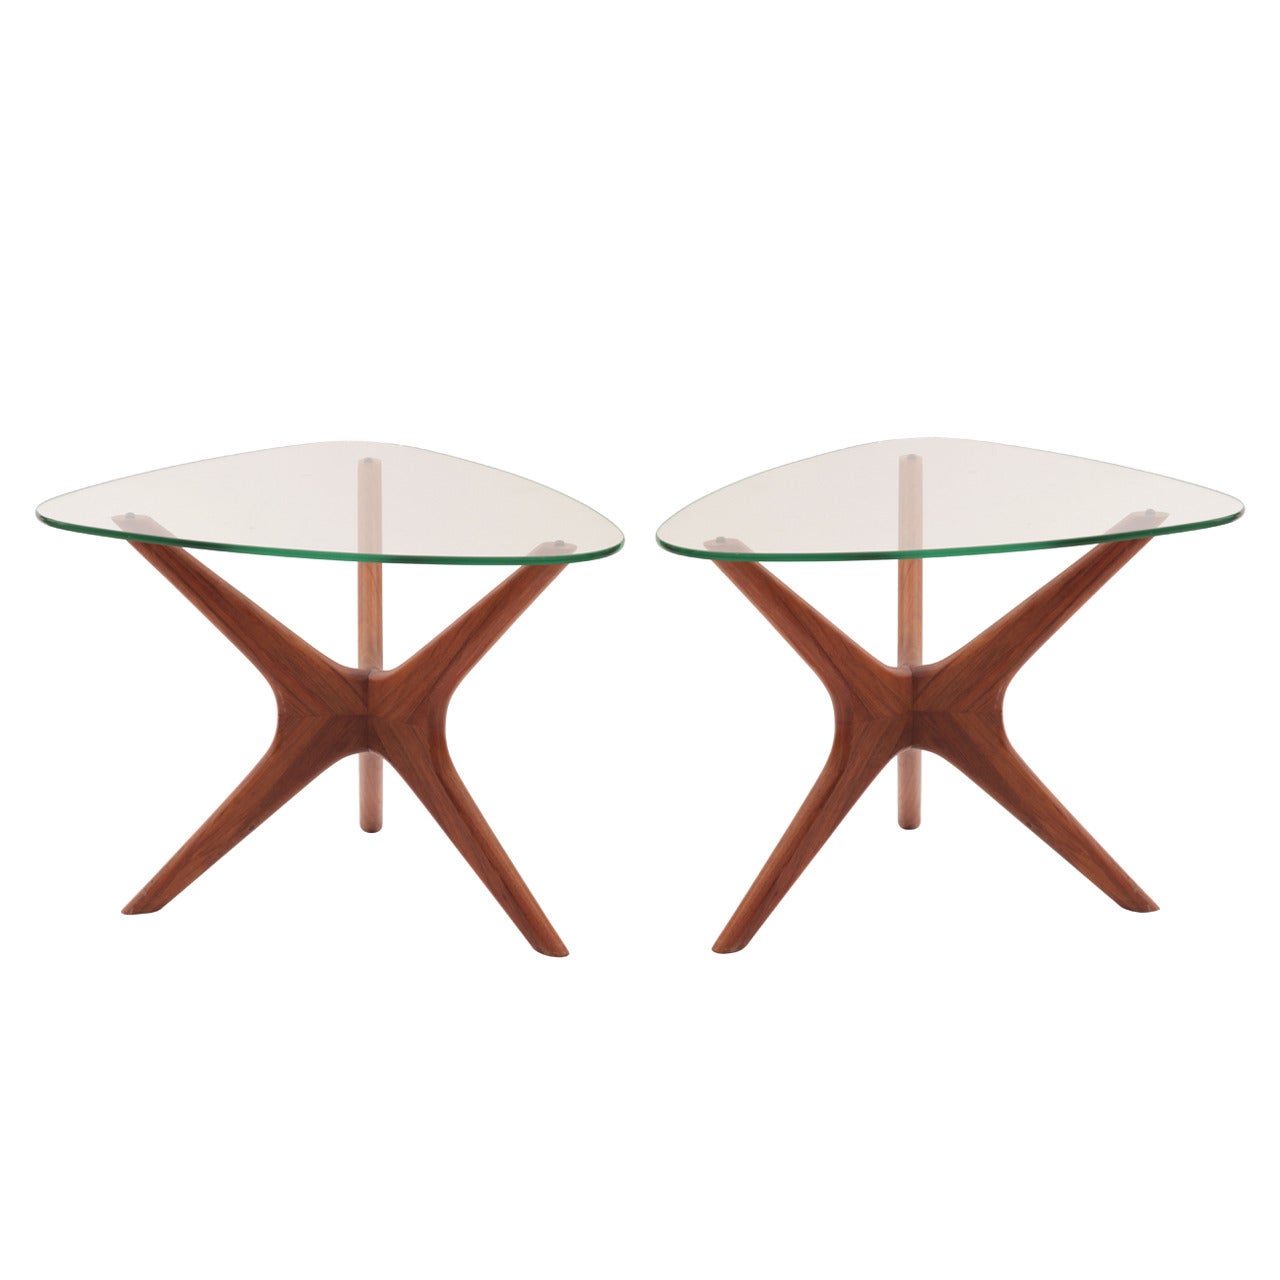 Sculptural Pair of Adrian Pearsall Walnut Side Tables